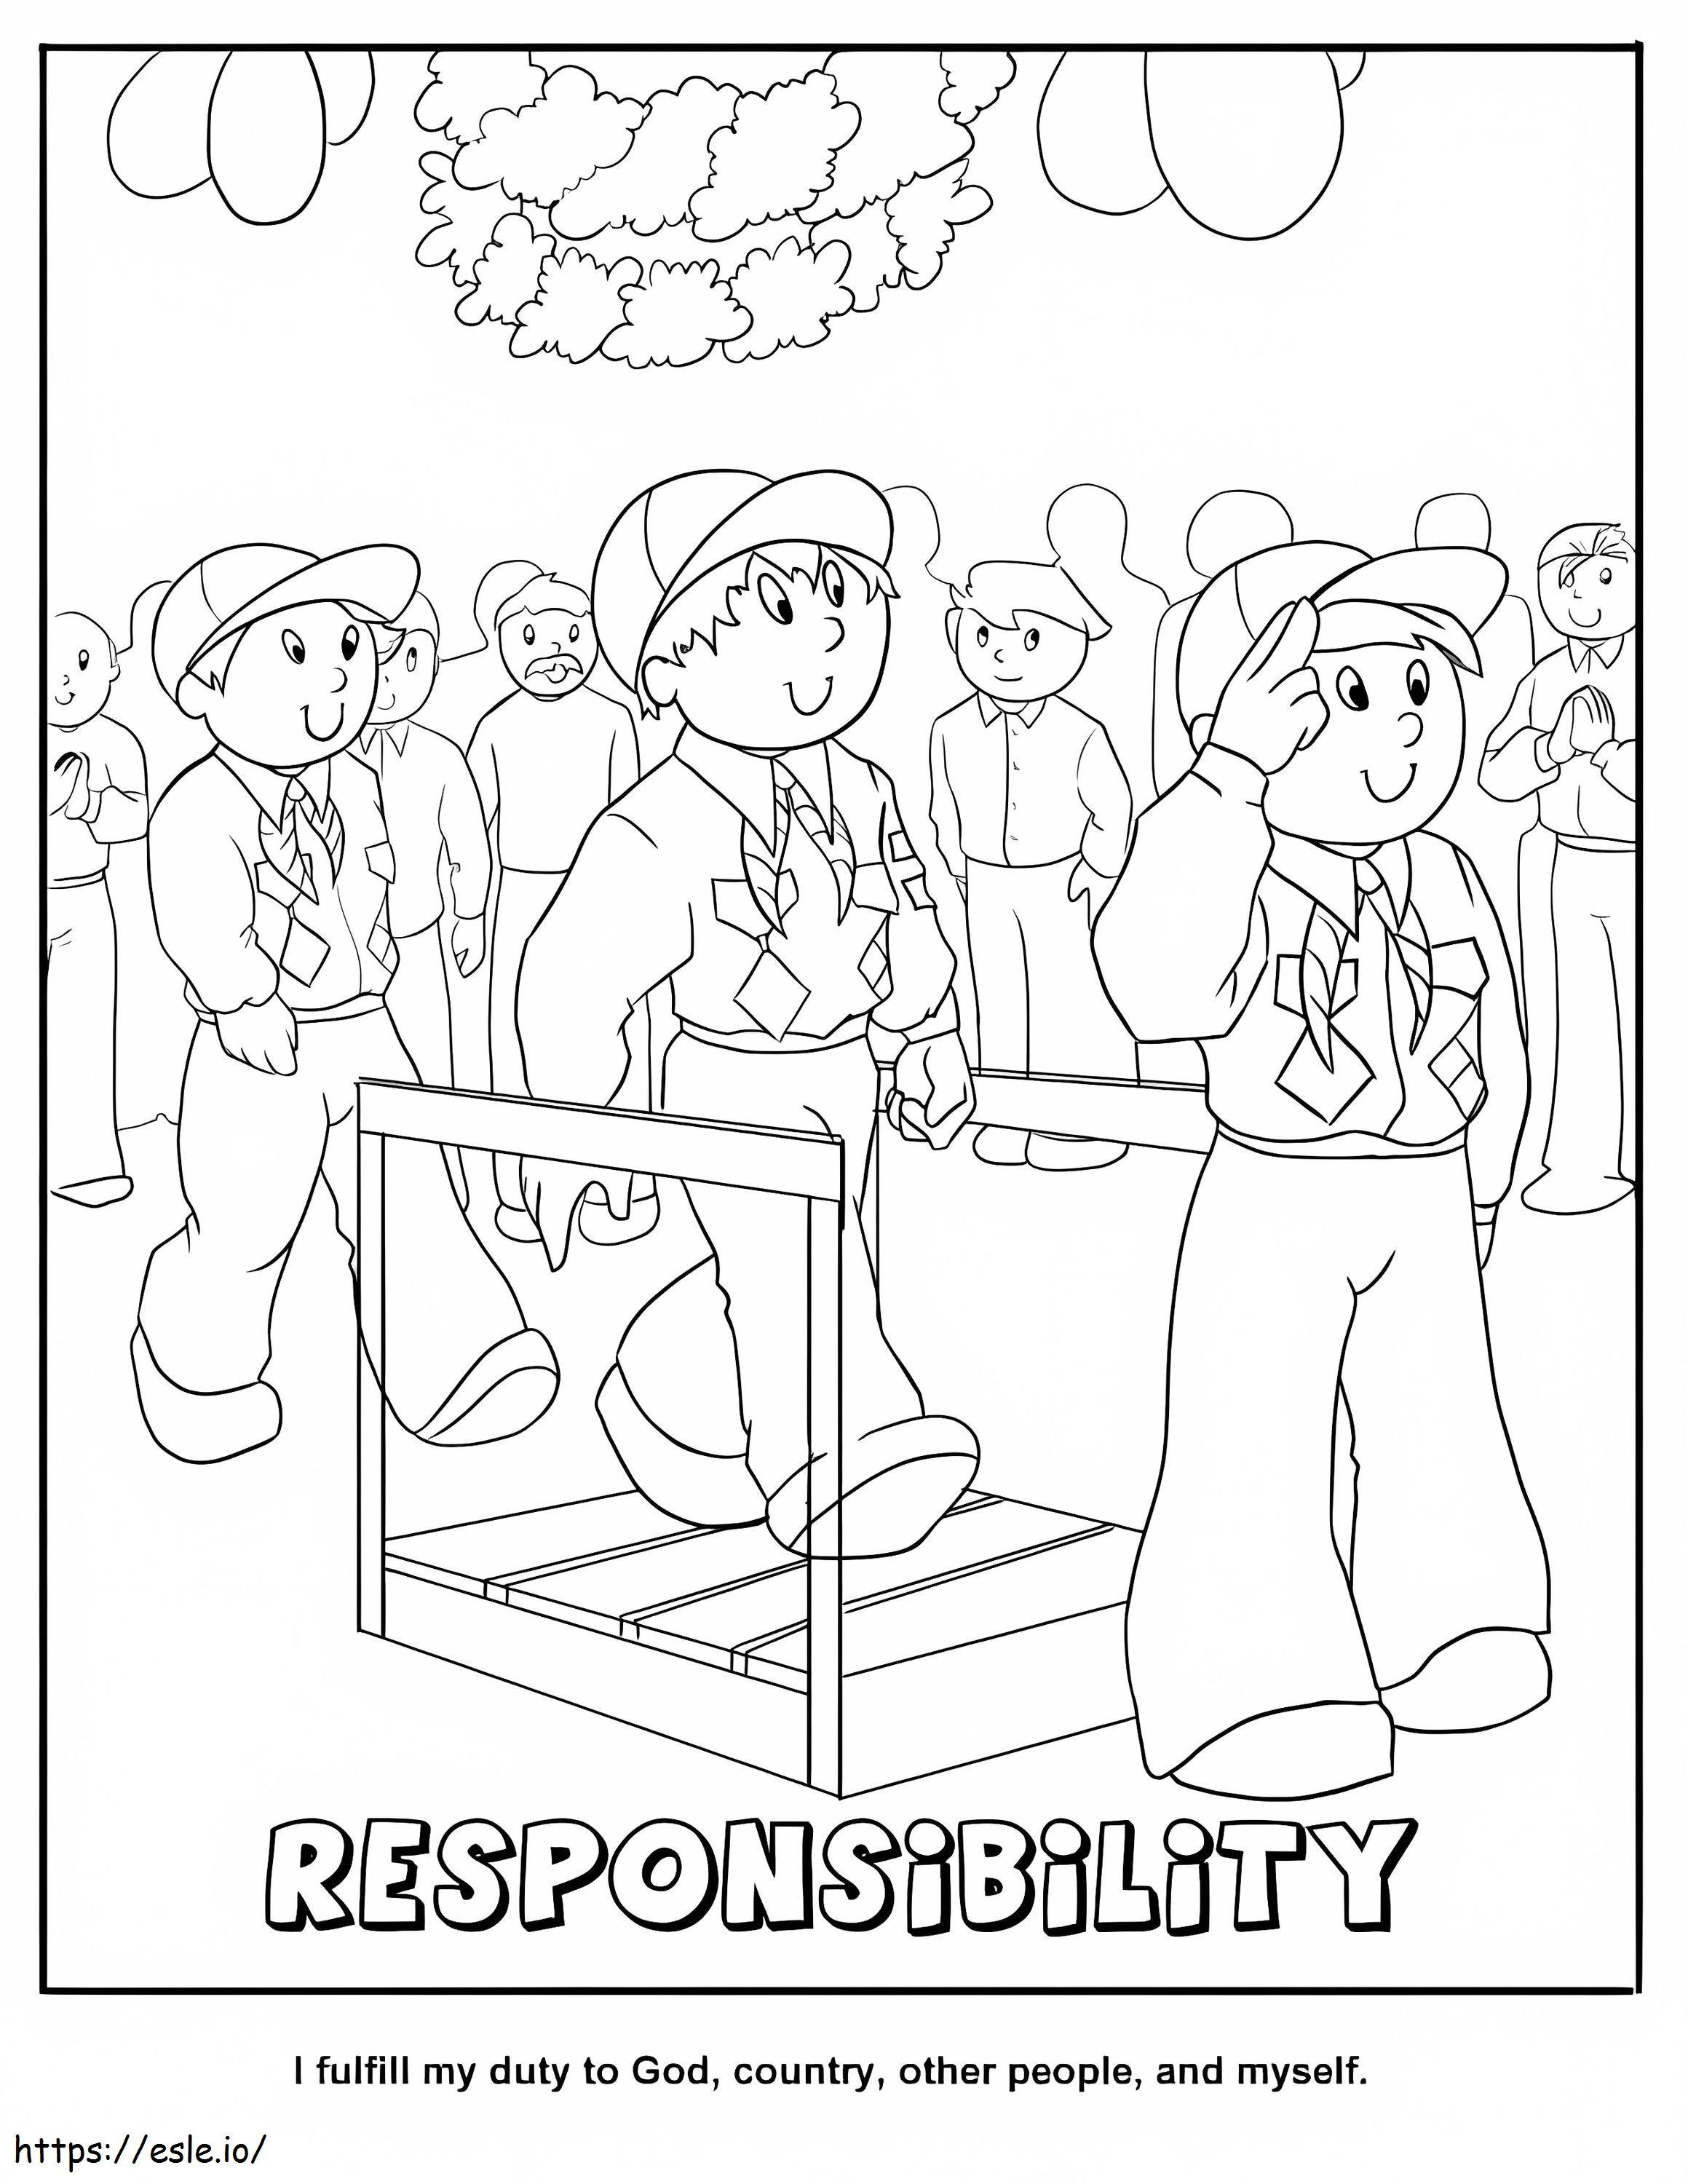 Responsibility Printable coloring page